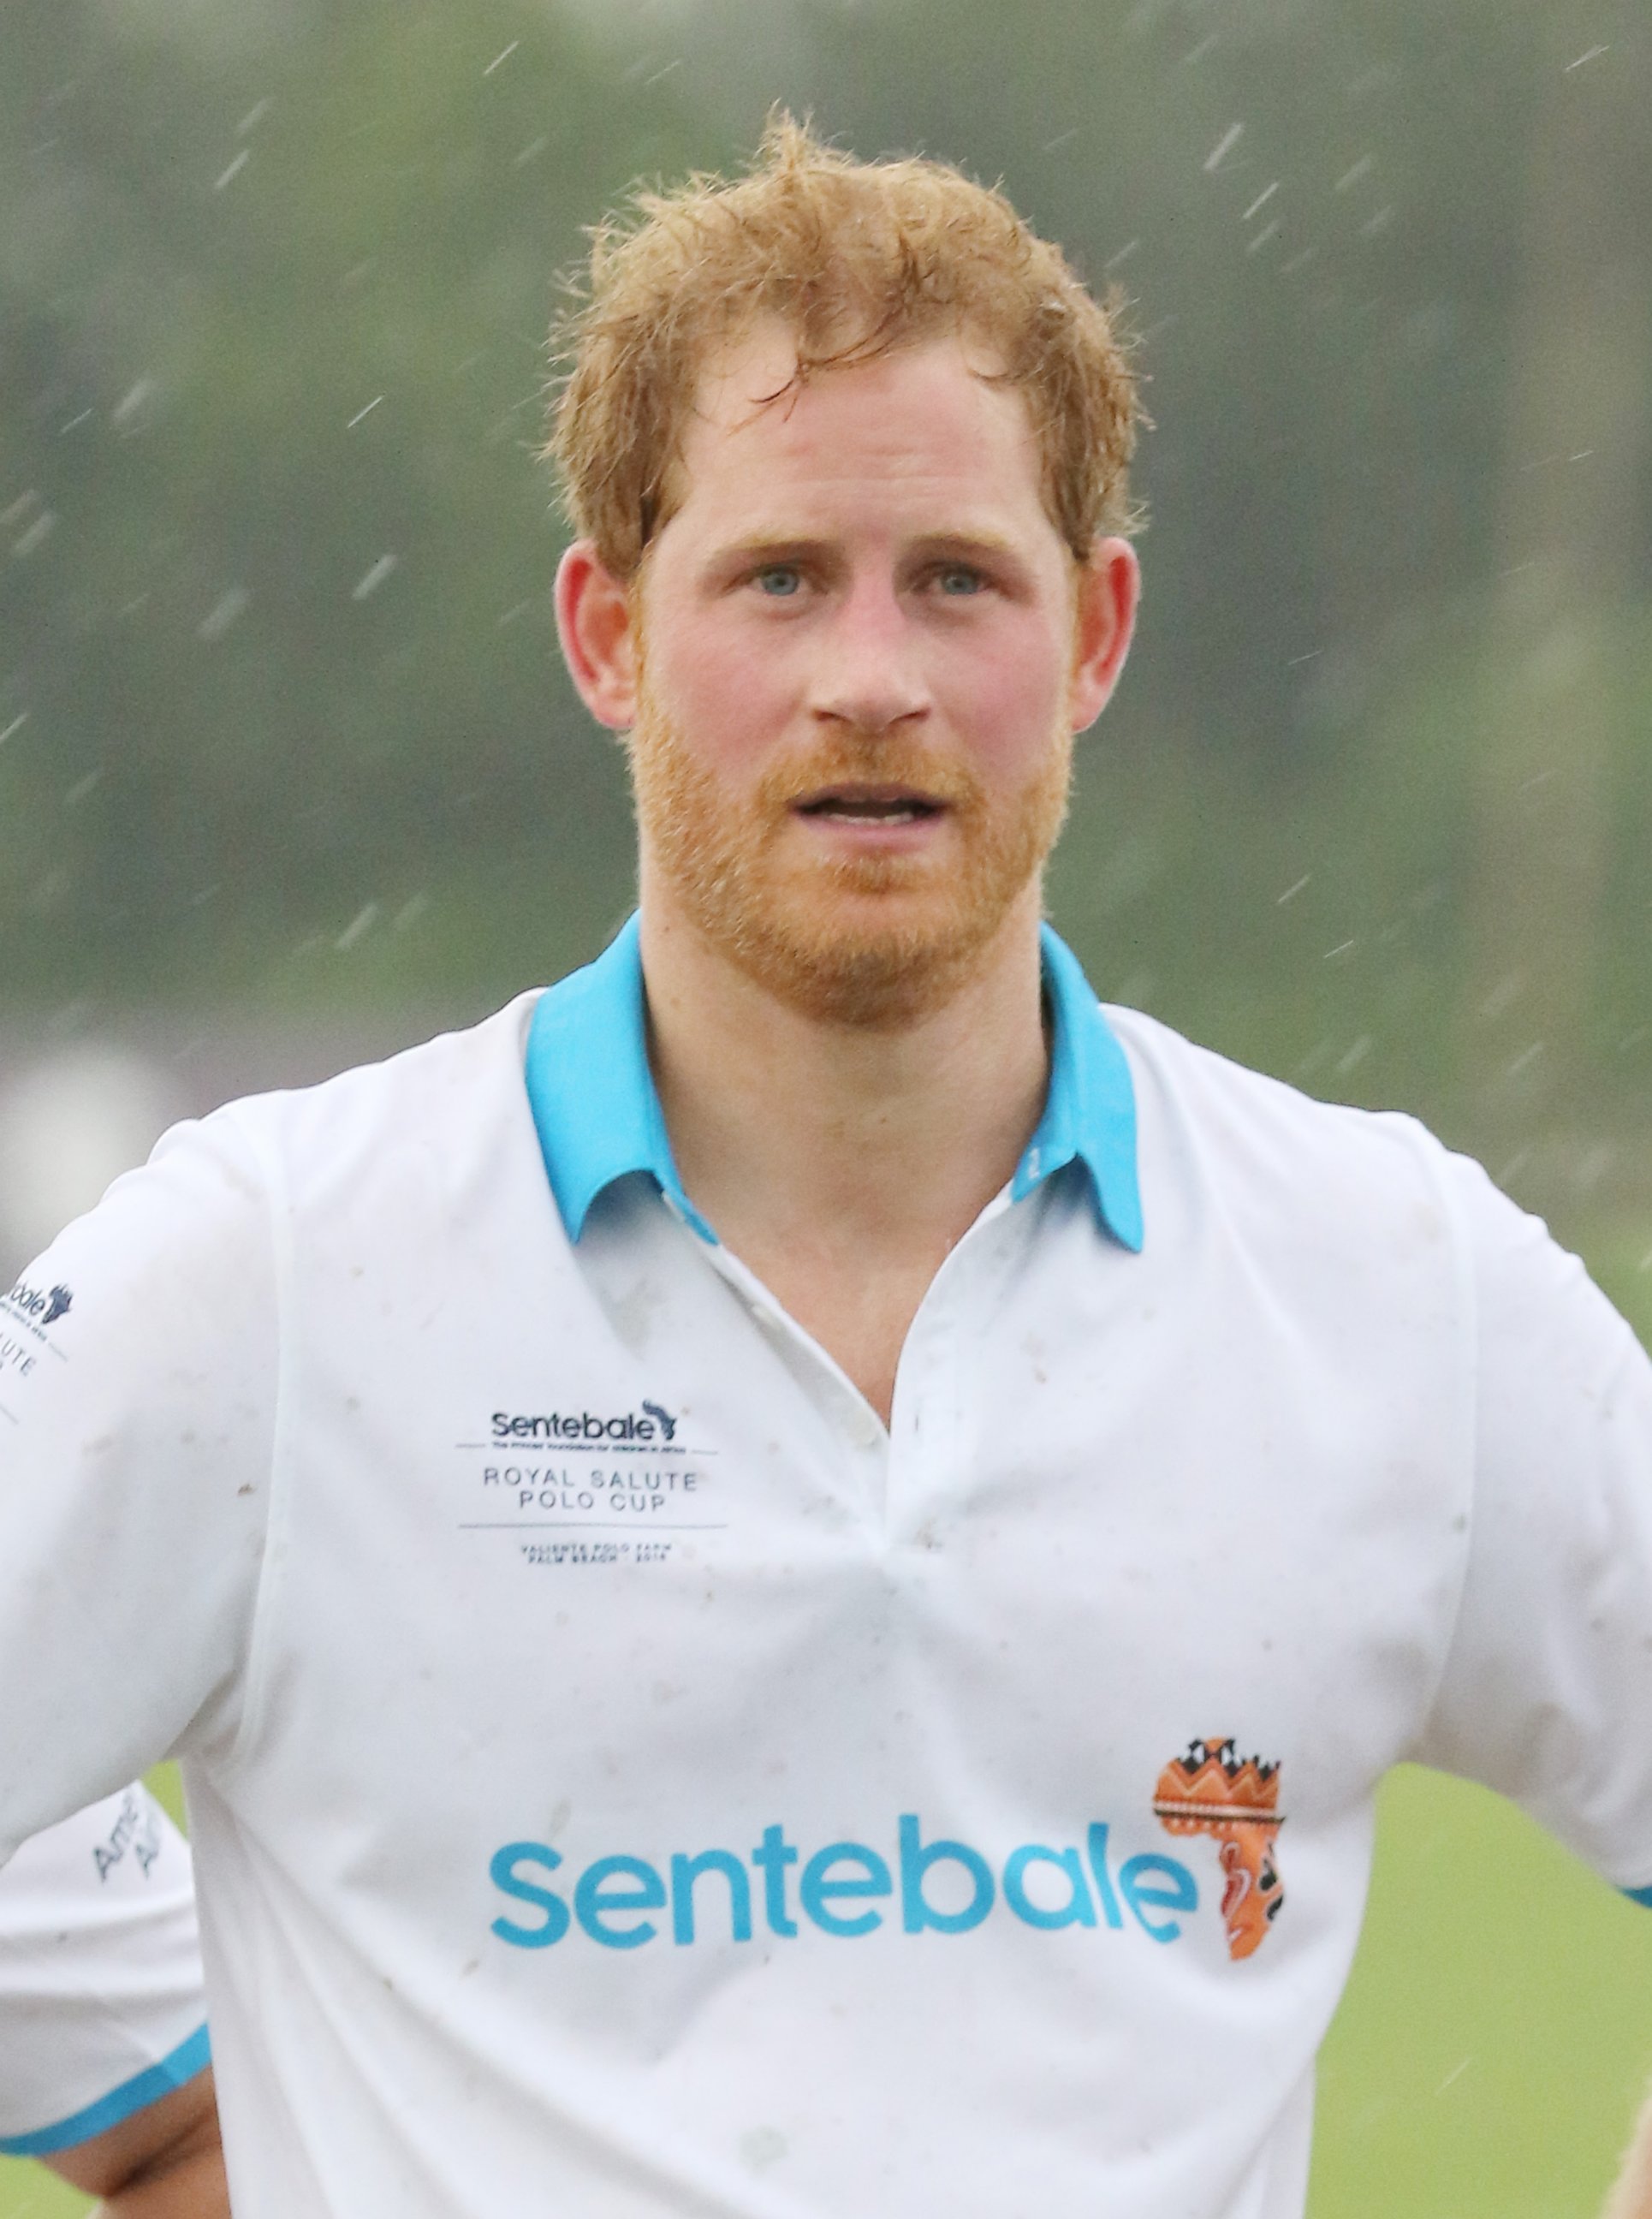 PHOTO: Prince Harry is seen during the awards ceremony at the Sentebale Royal Salute Polo Cup on May 4, 2016 in Wellington, Florida.